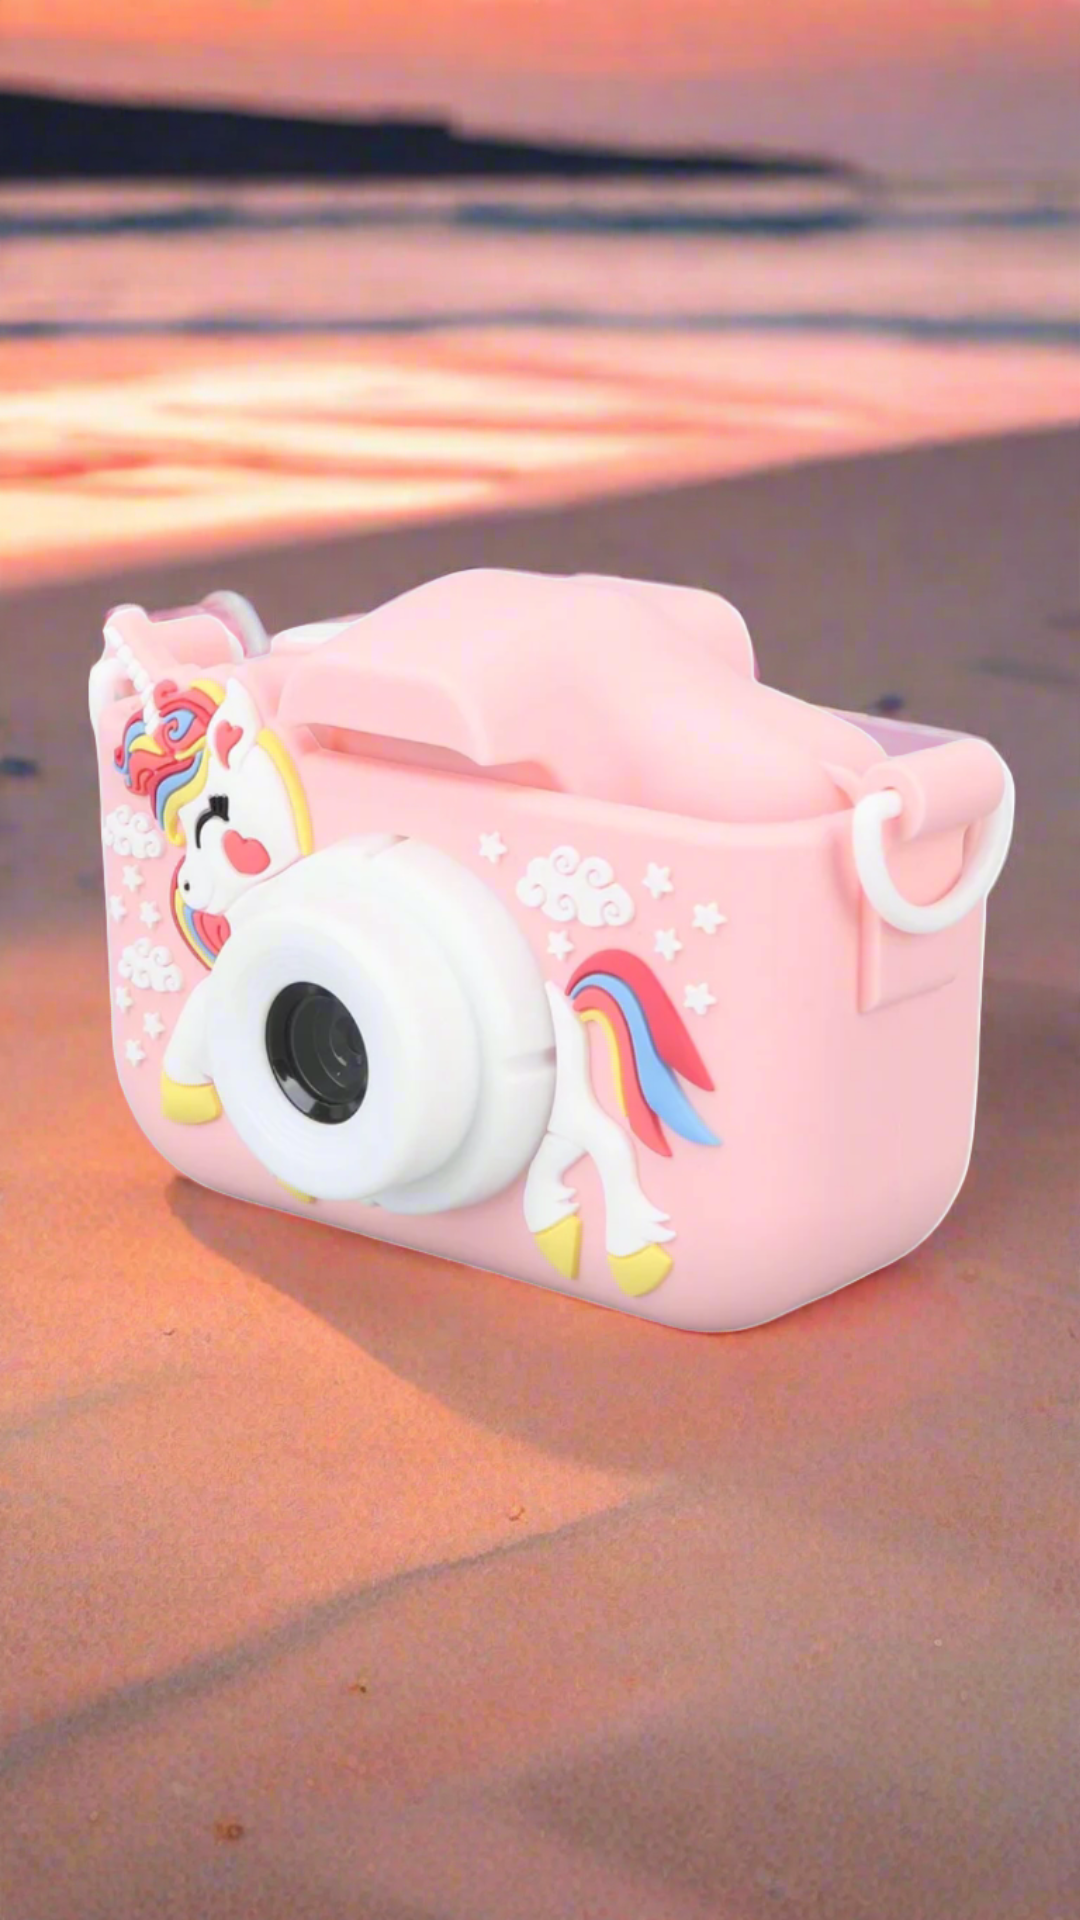 Rainbow Toys Unicorn Magic The Ultimate Kid's Camera with Games Assorted Color